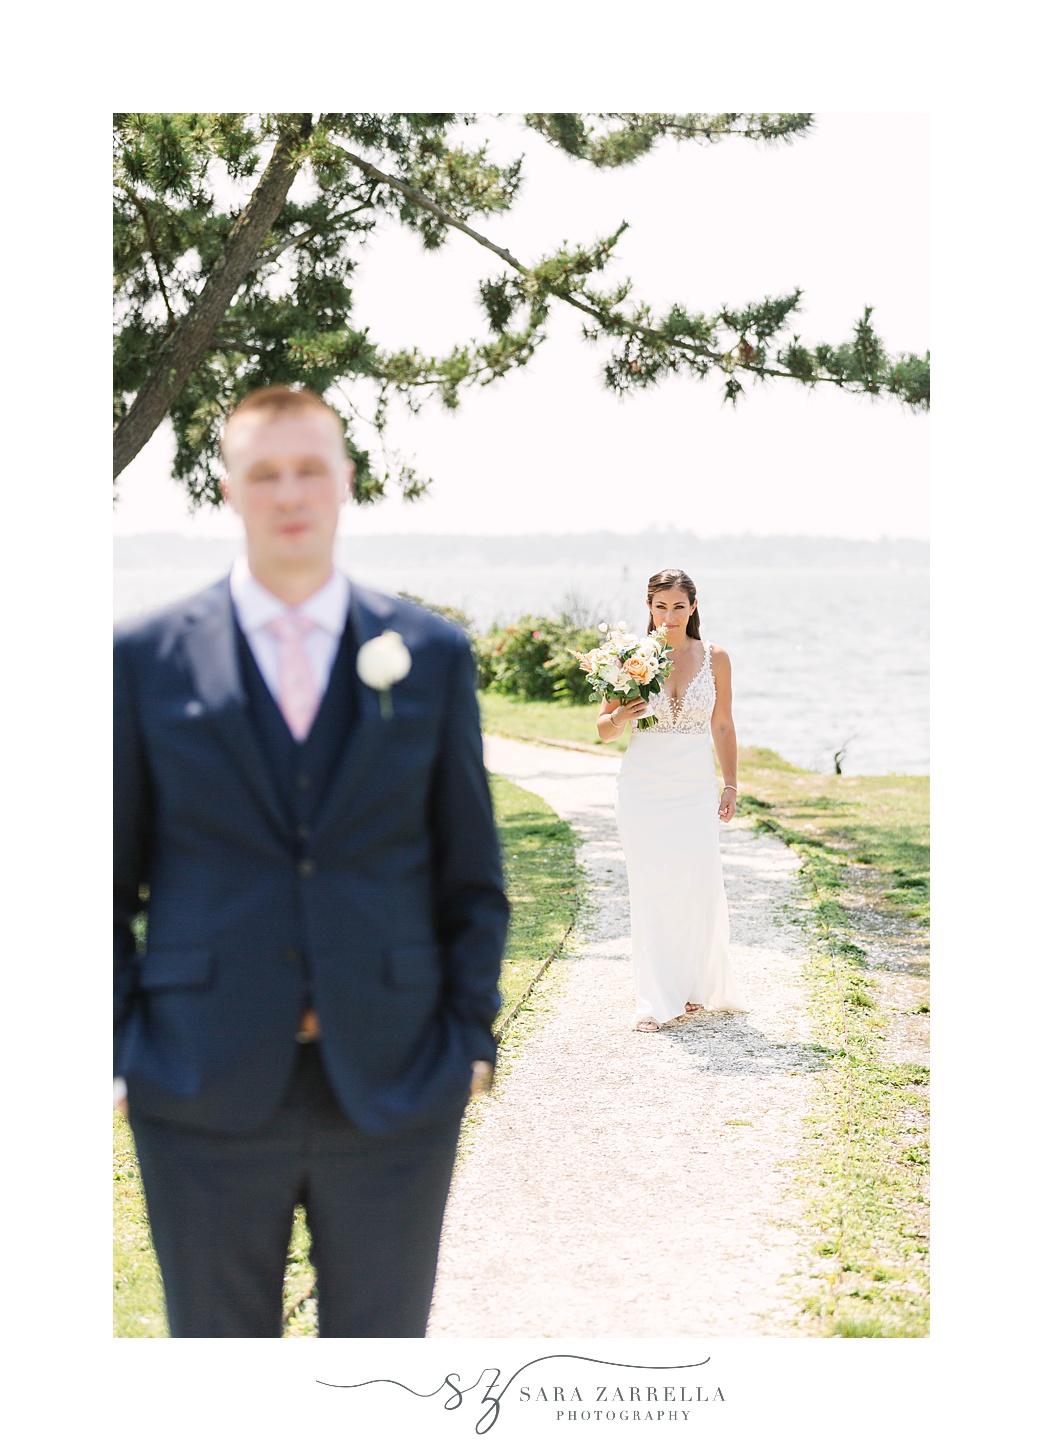 bride walks up to groom for first look during Gurney’s Newport Resort wedding day